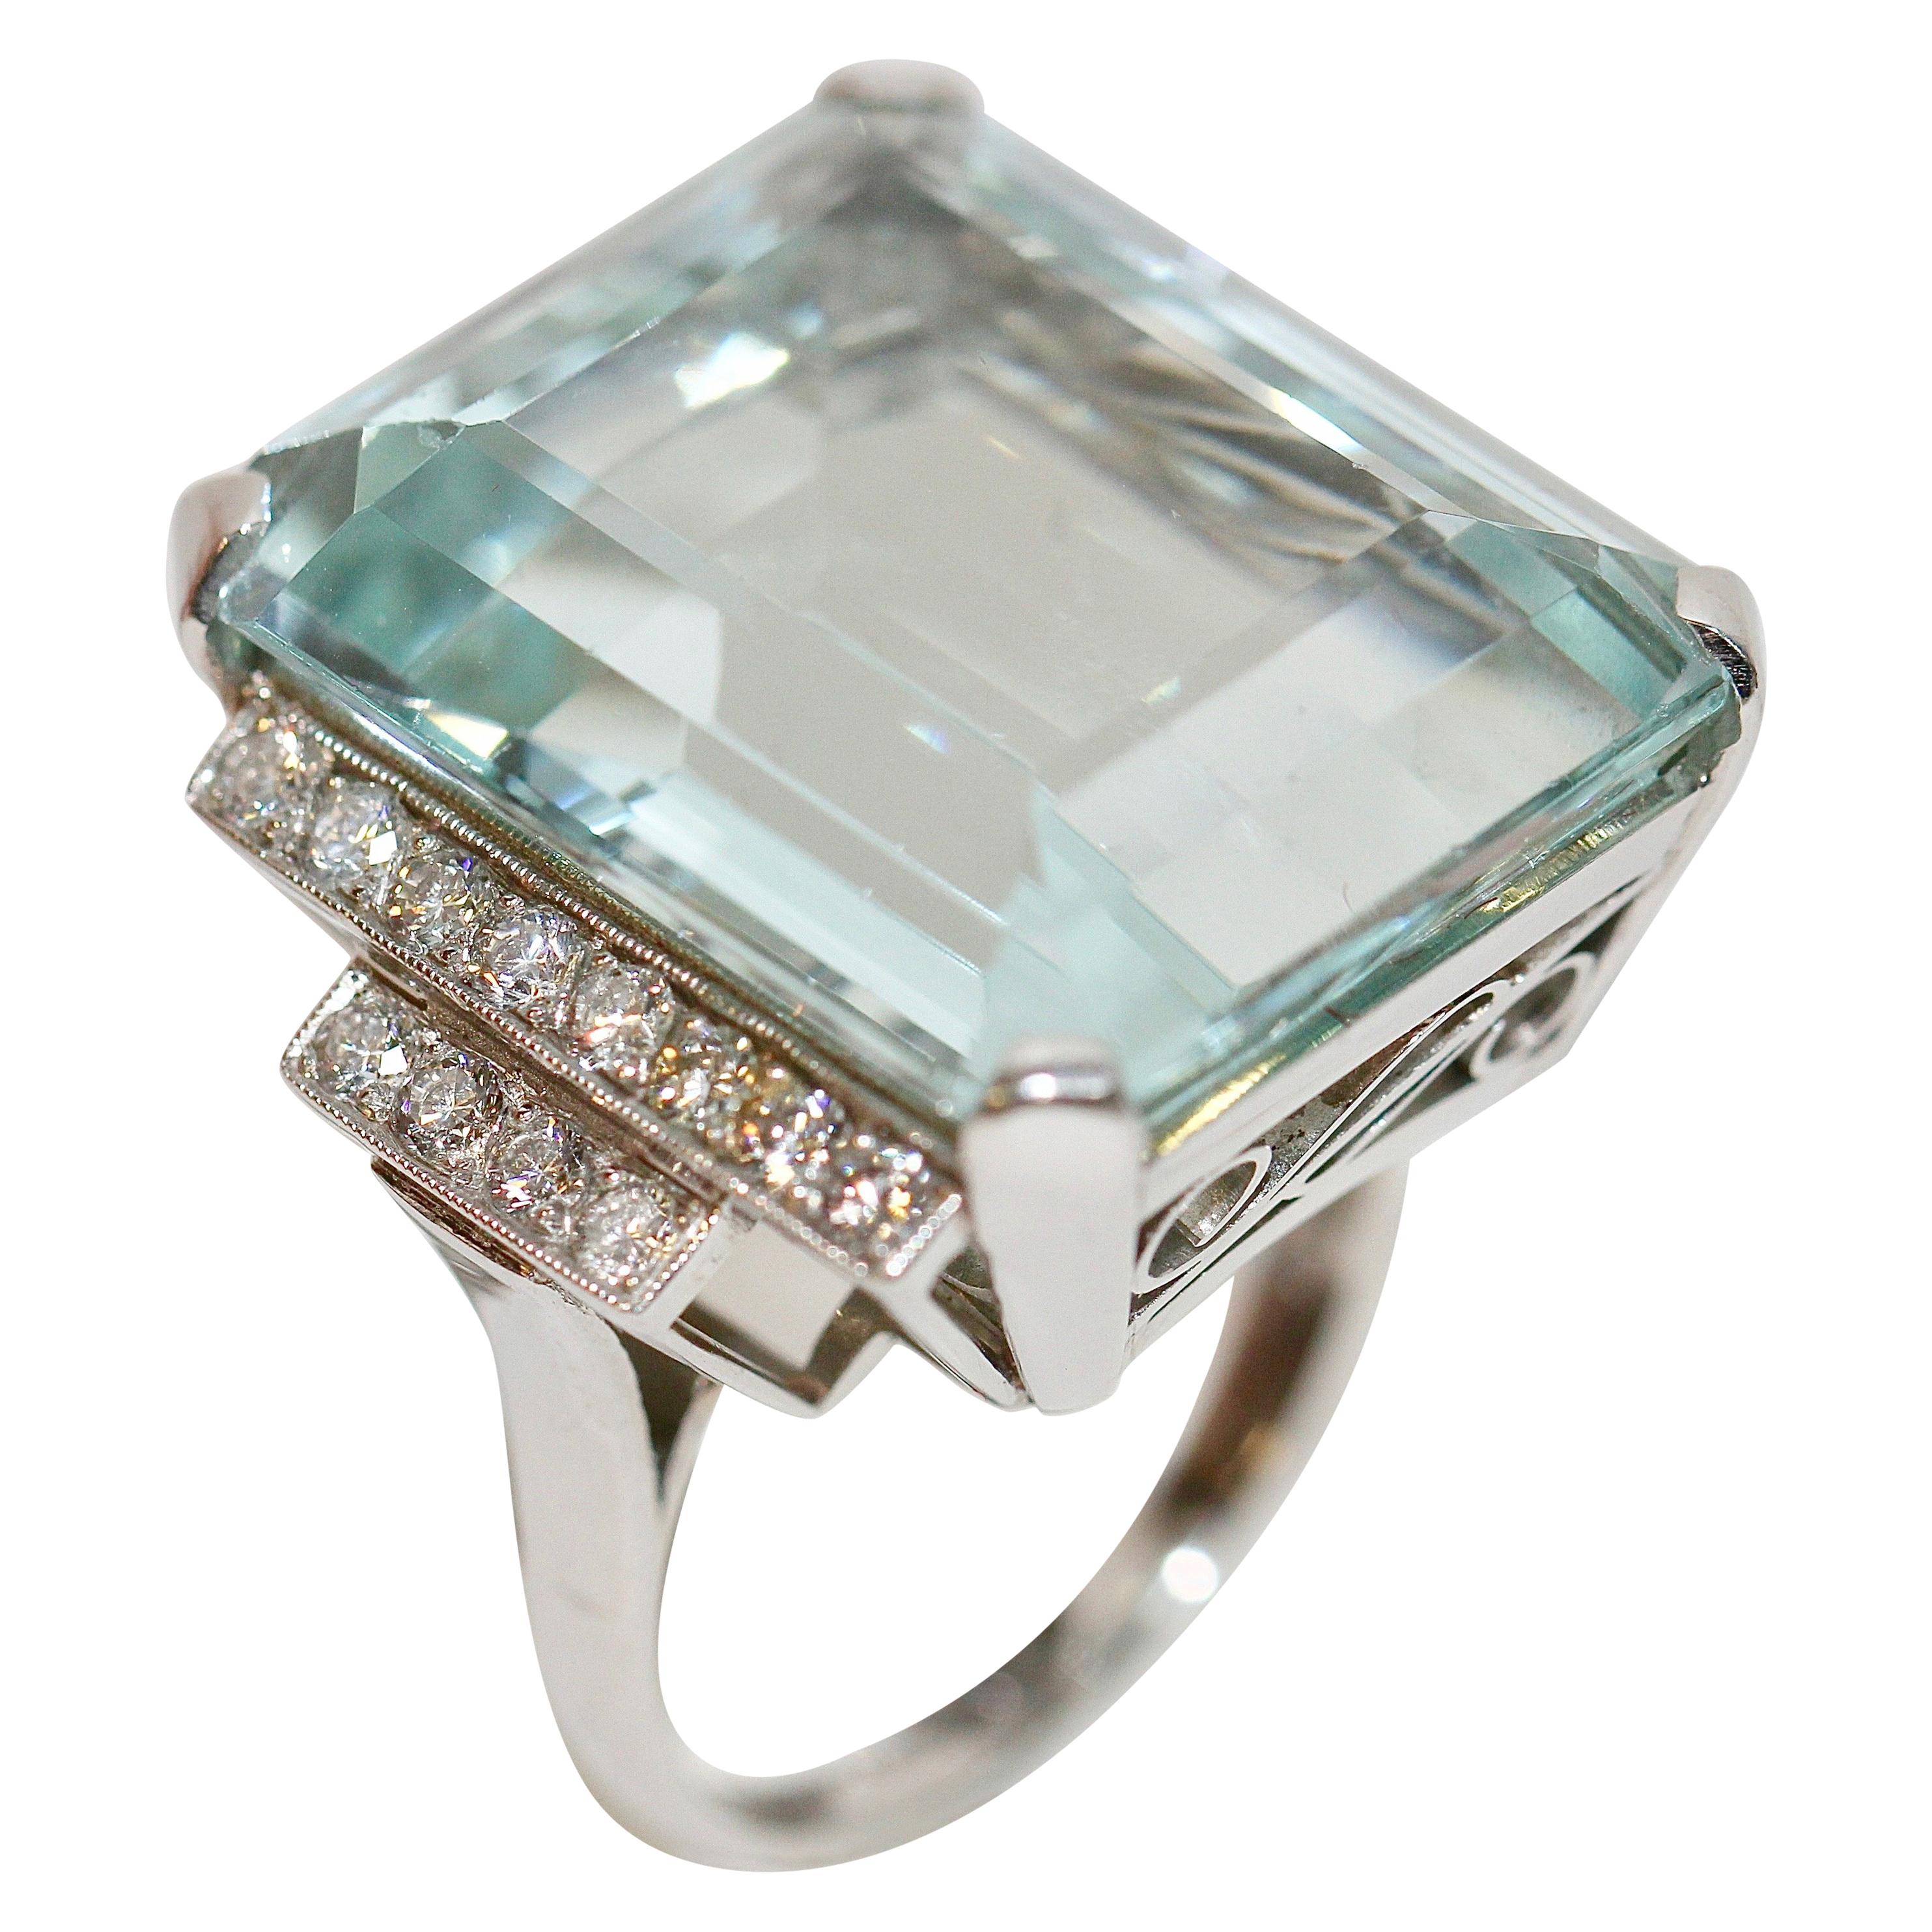 Gorgeous 950 Platinum Ring with Large 34.8ct Faceted Aquamarine and 24 Diamonds For Sale